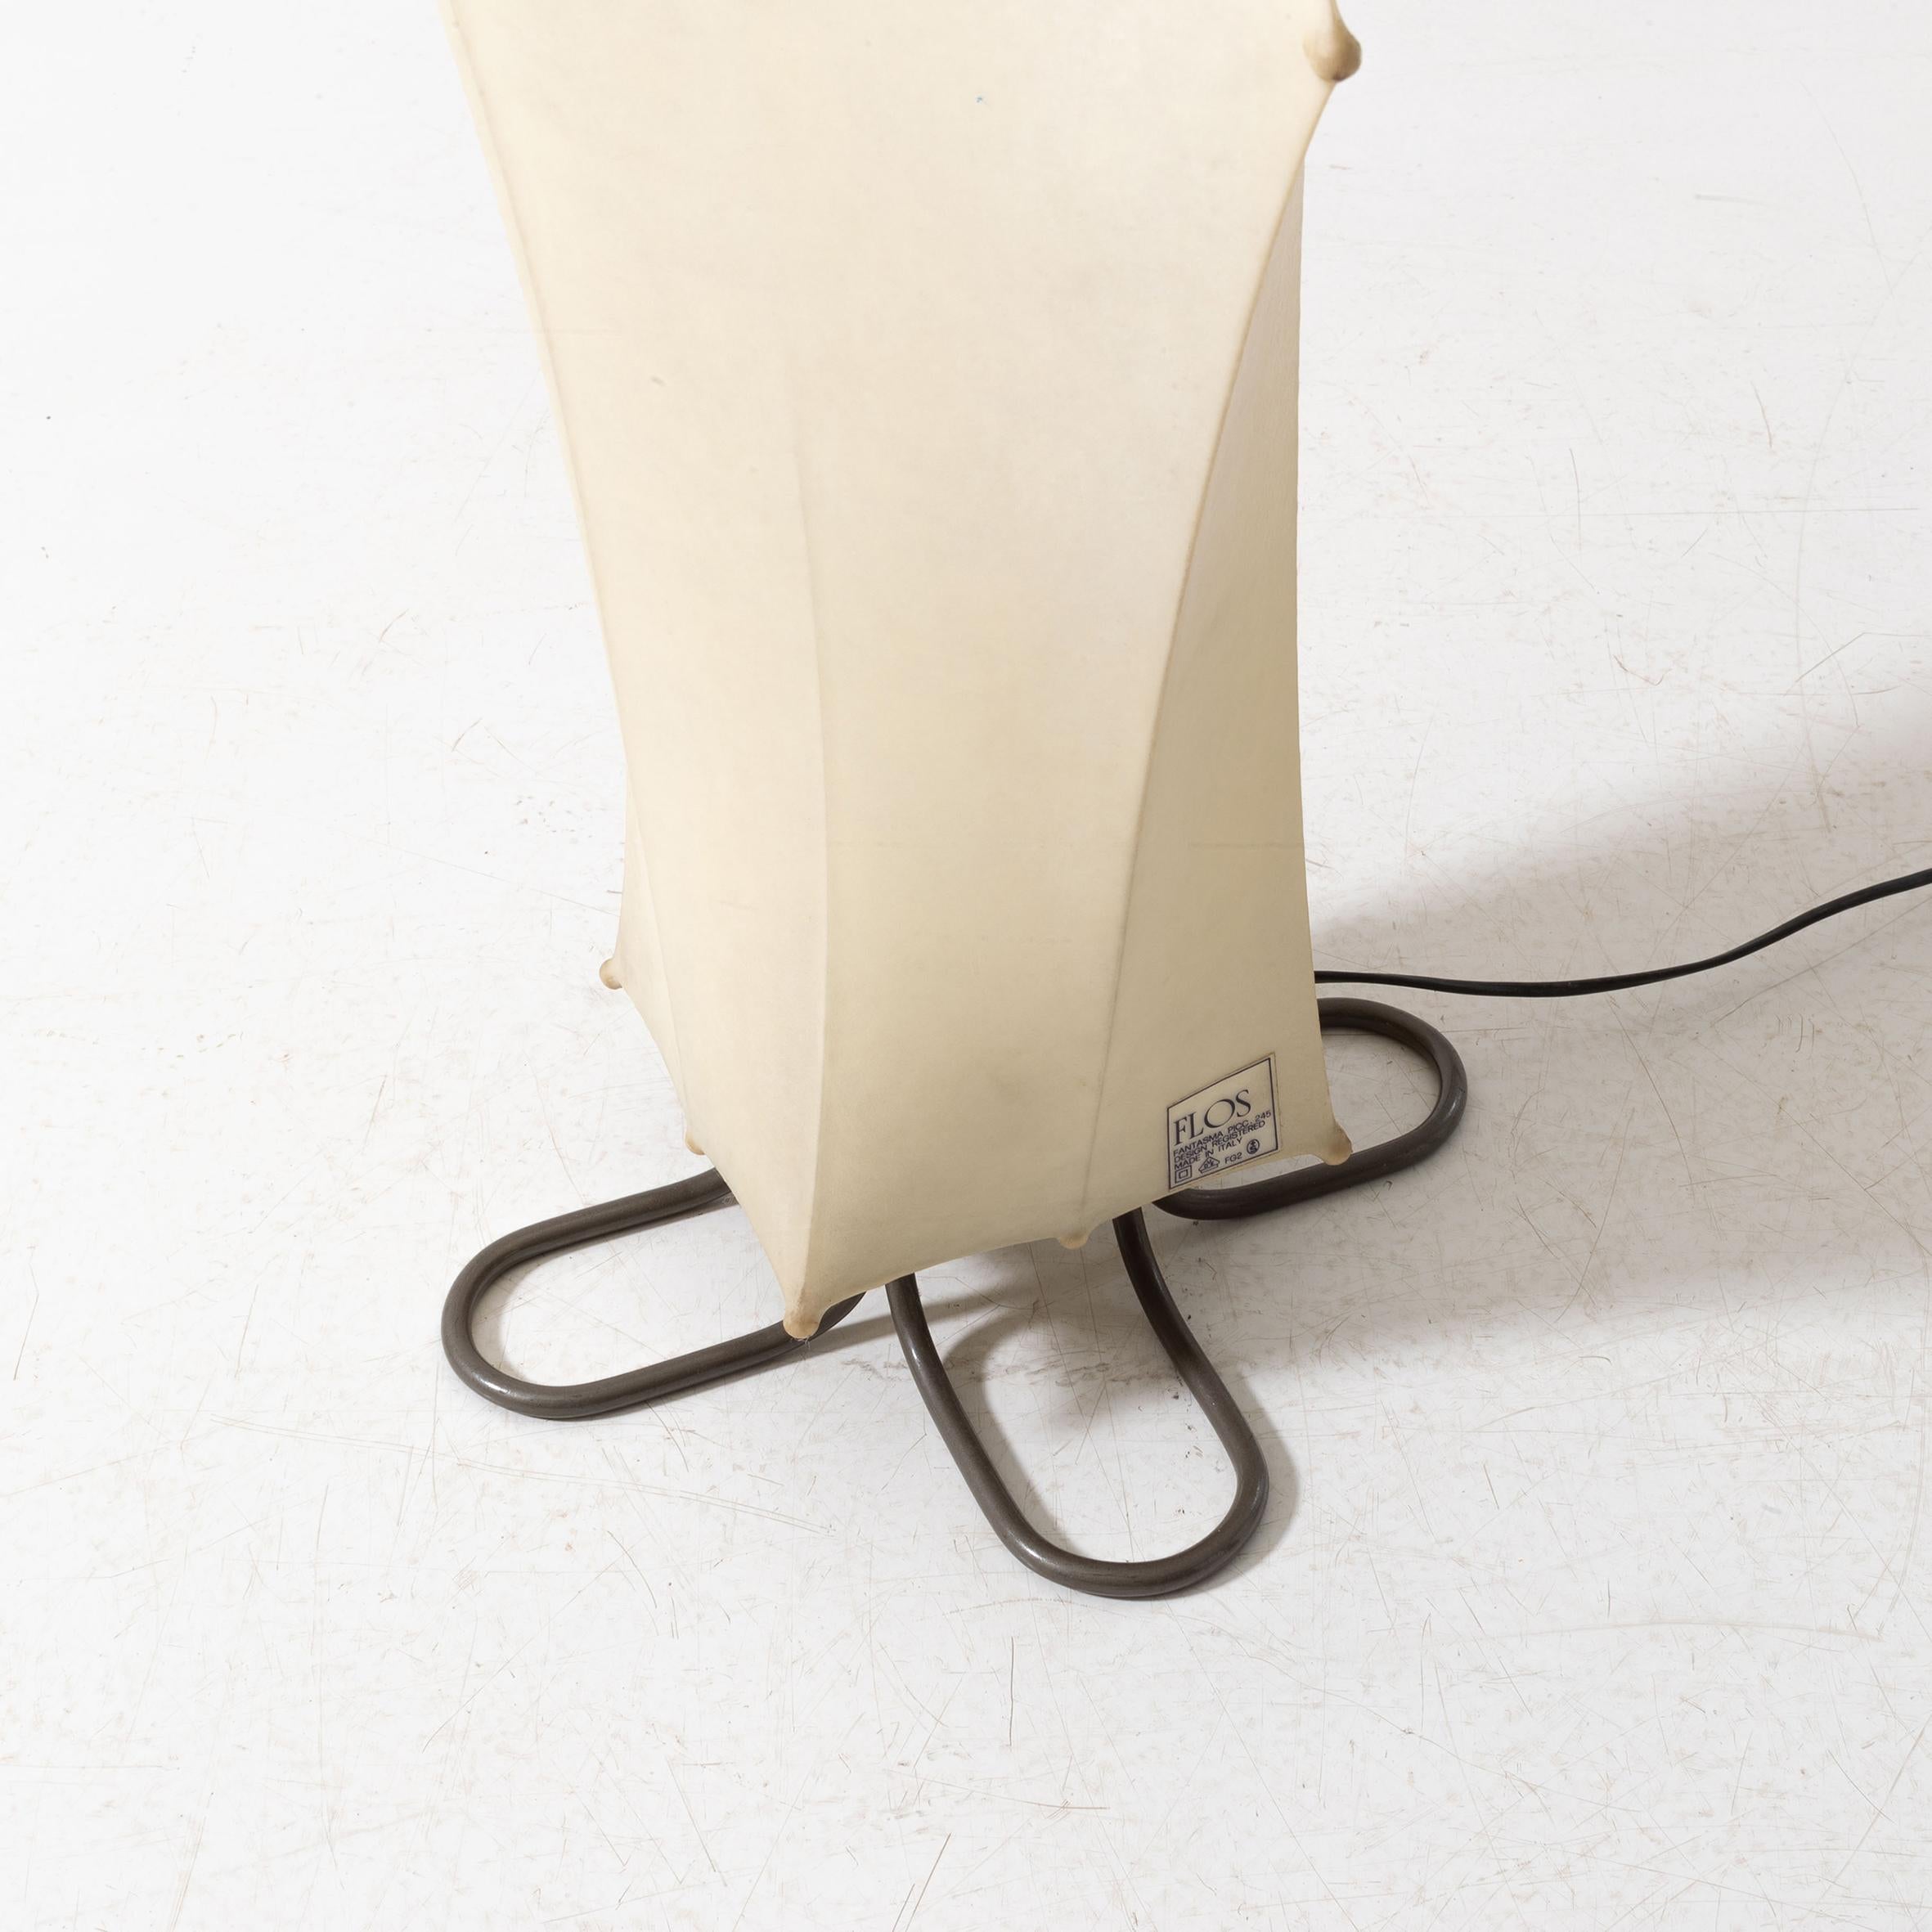 Afra & Tobia Scarpa

Fantasma

A floor lamp, the internal metal frame covered with a sprayed resin coated shade.
Produced by Flos.
Circa 1964. Italy.

Note
One lamp in the collection of the Triennale museum, Milan.
A beautiful exemple of this iconic